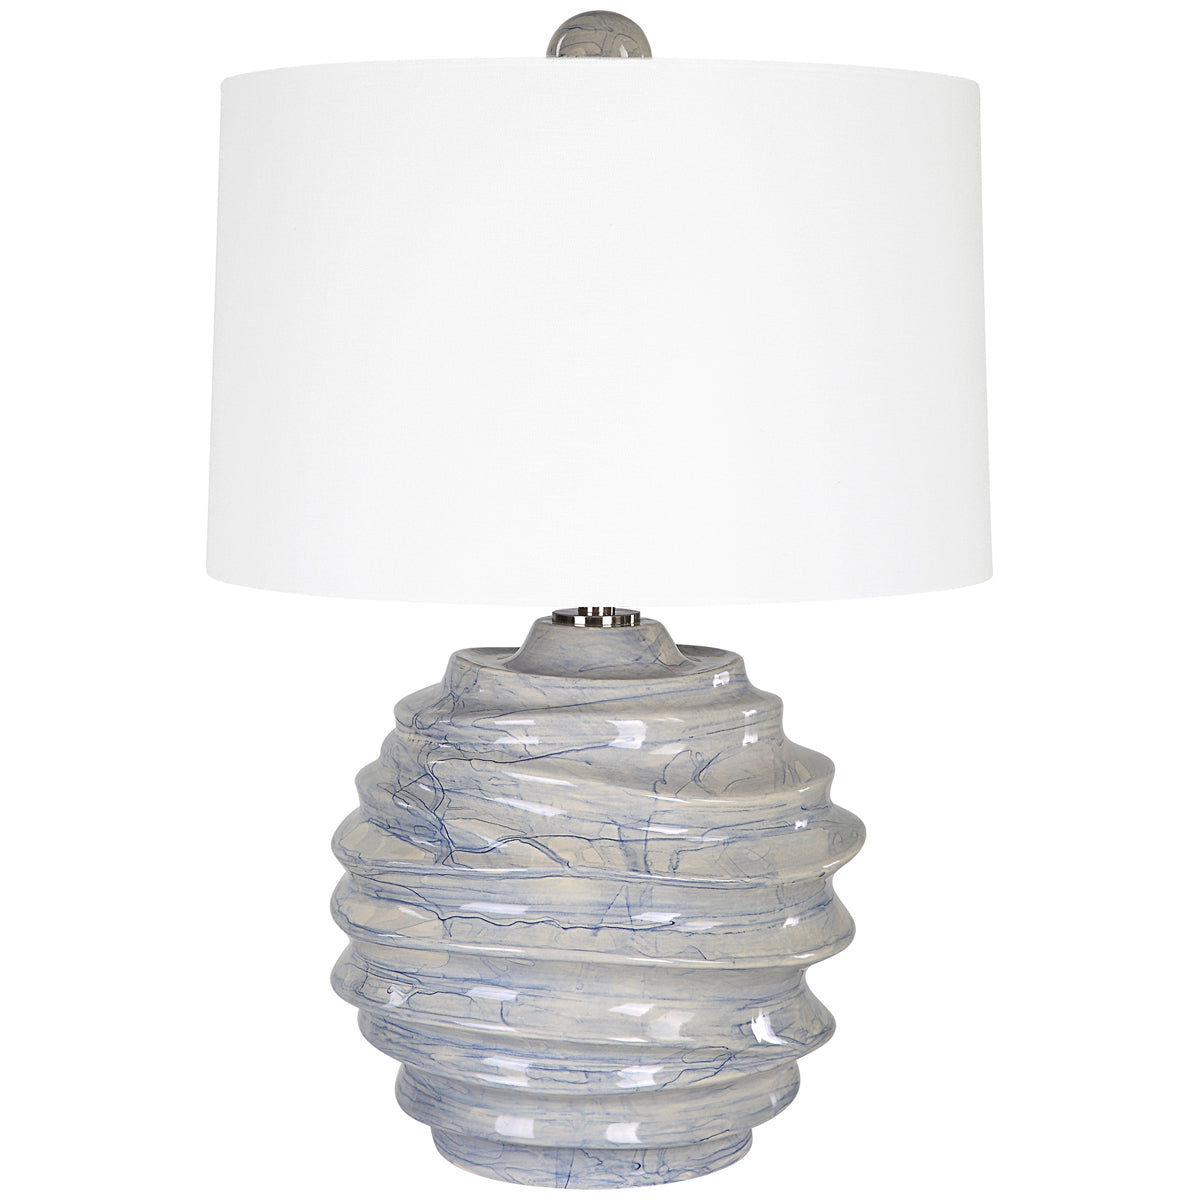 Uttermost Waves Blue and White Accent Lamp